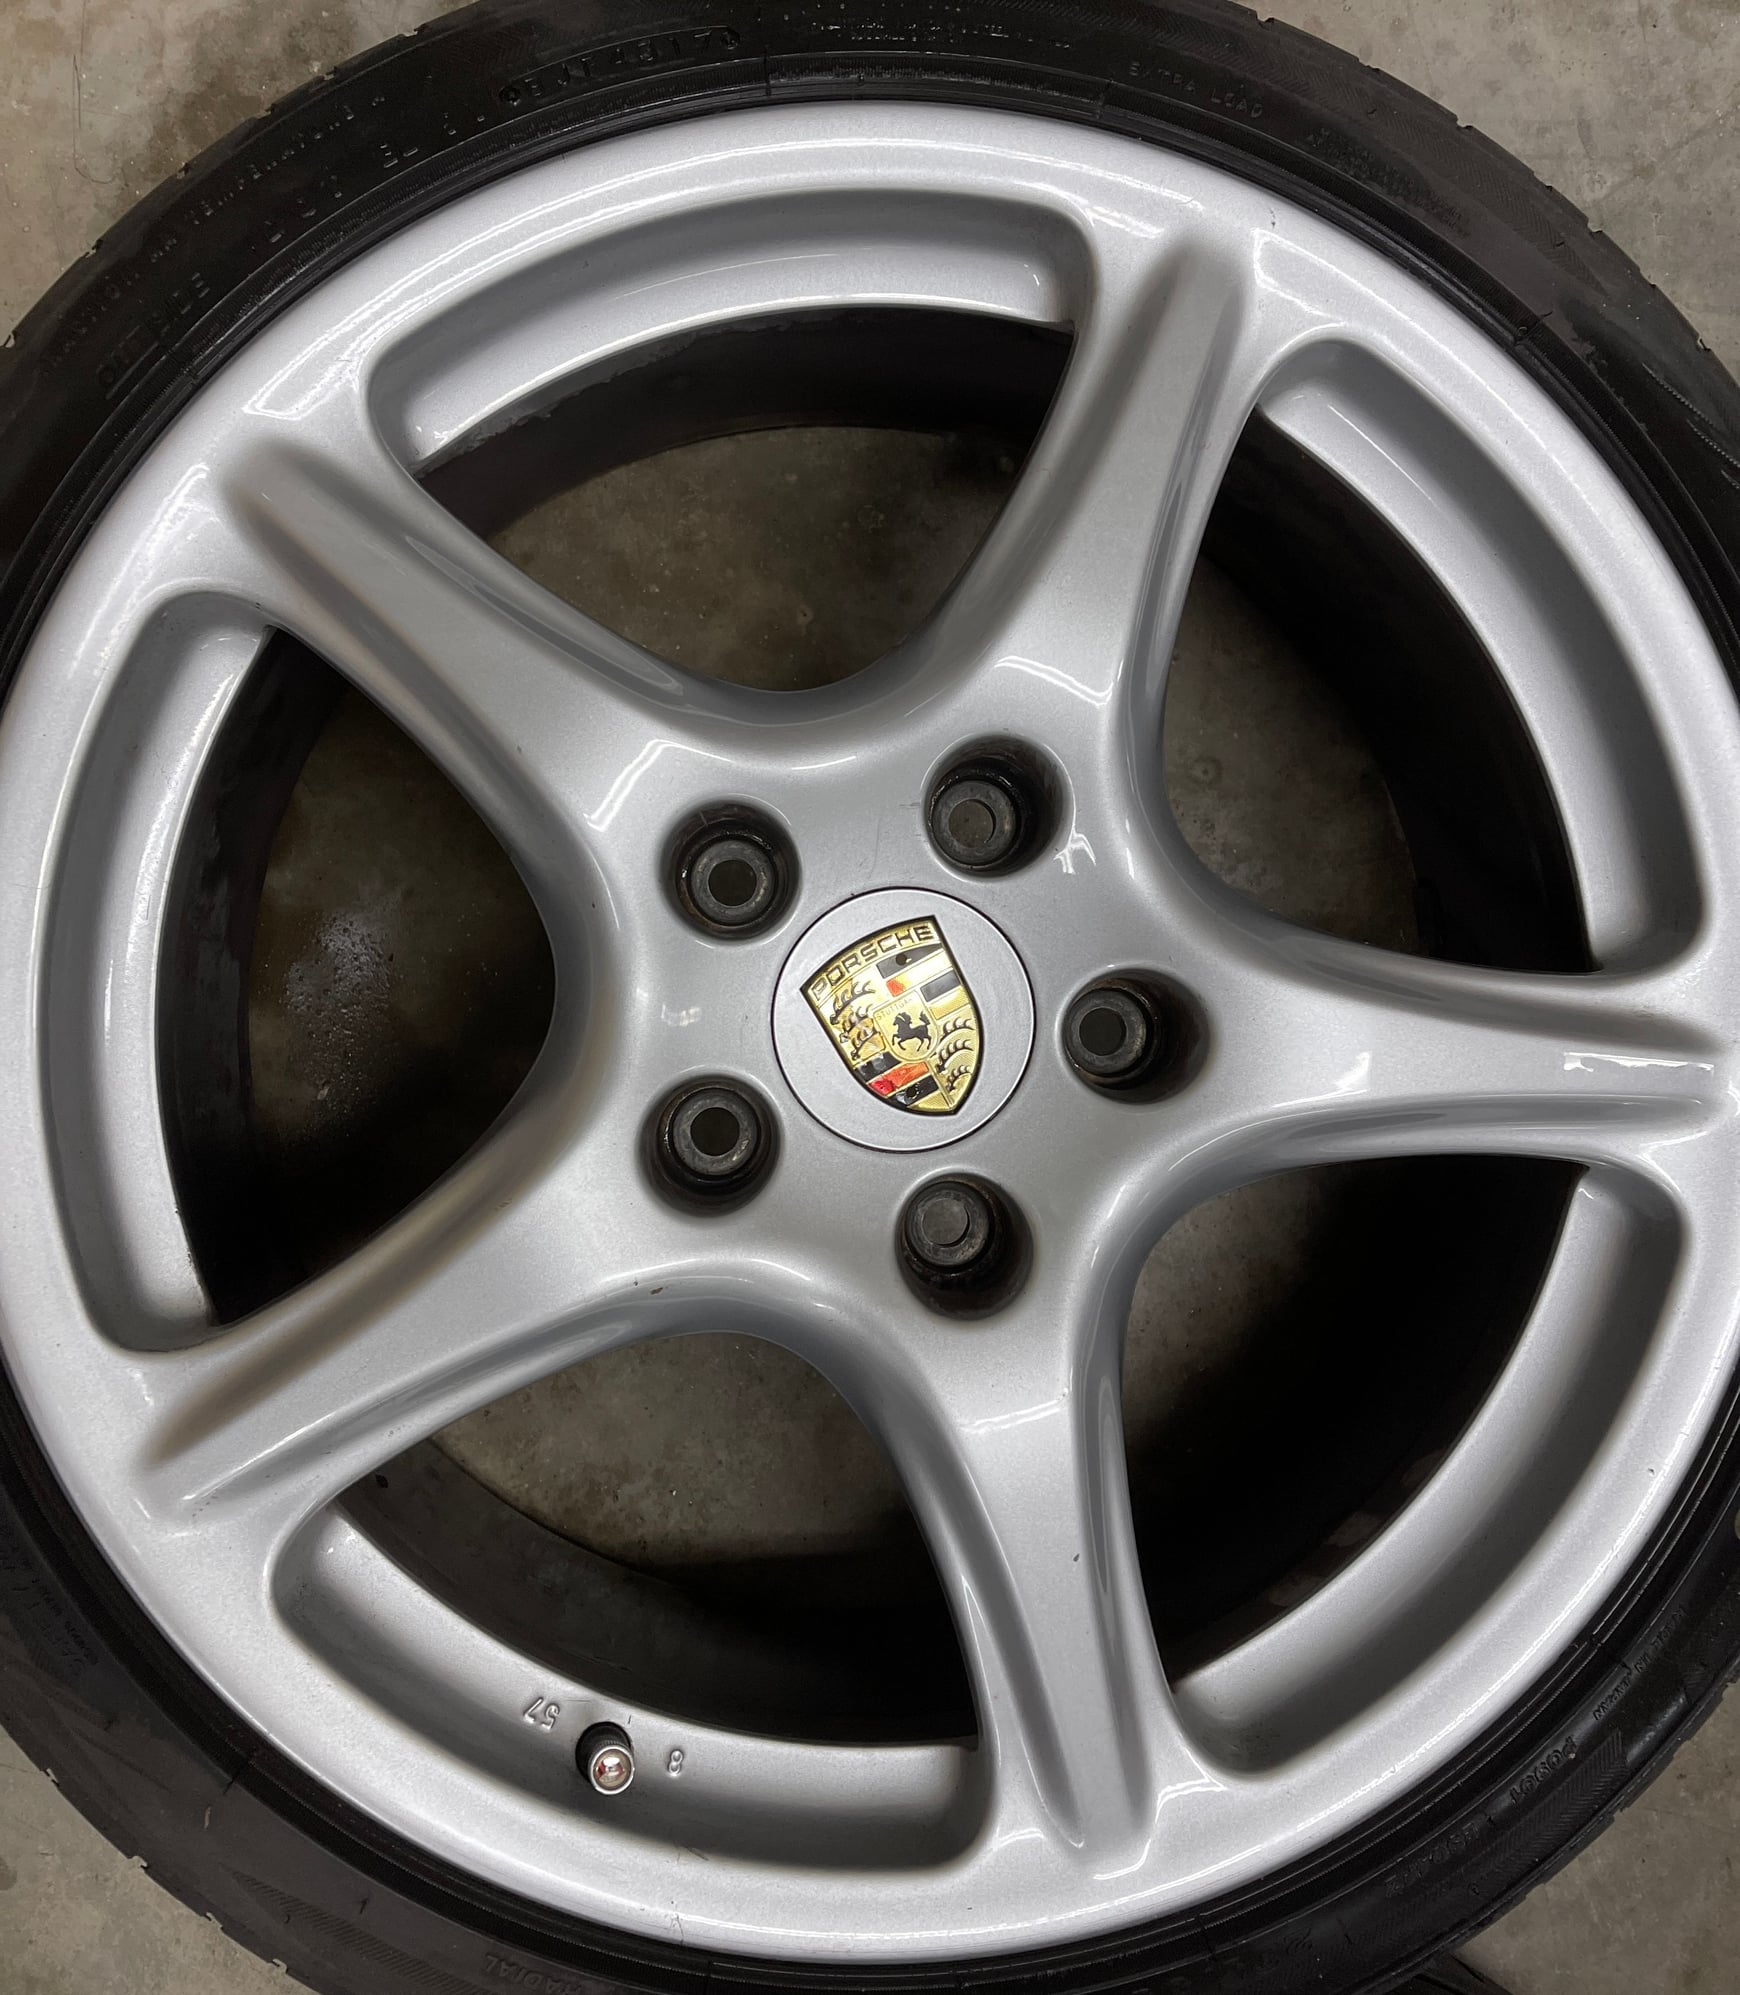 Wheels and Tires/Axles - Porsche 997 Carrera II 19 Inch Wheels - Used - 2005 to 2012 Porsche 911 - Charlotte, NC 28270, United States